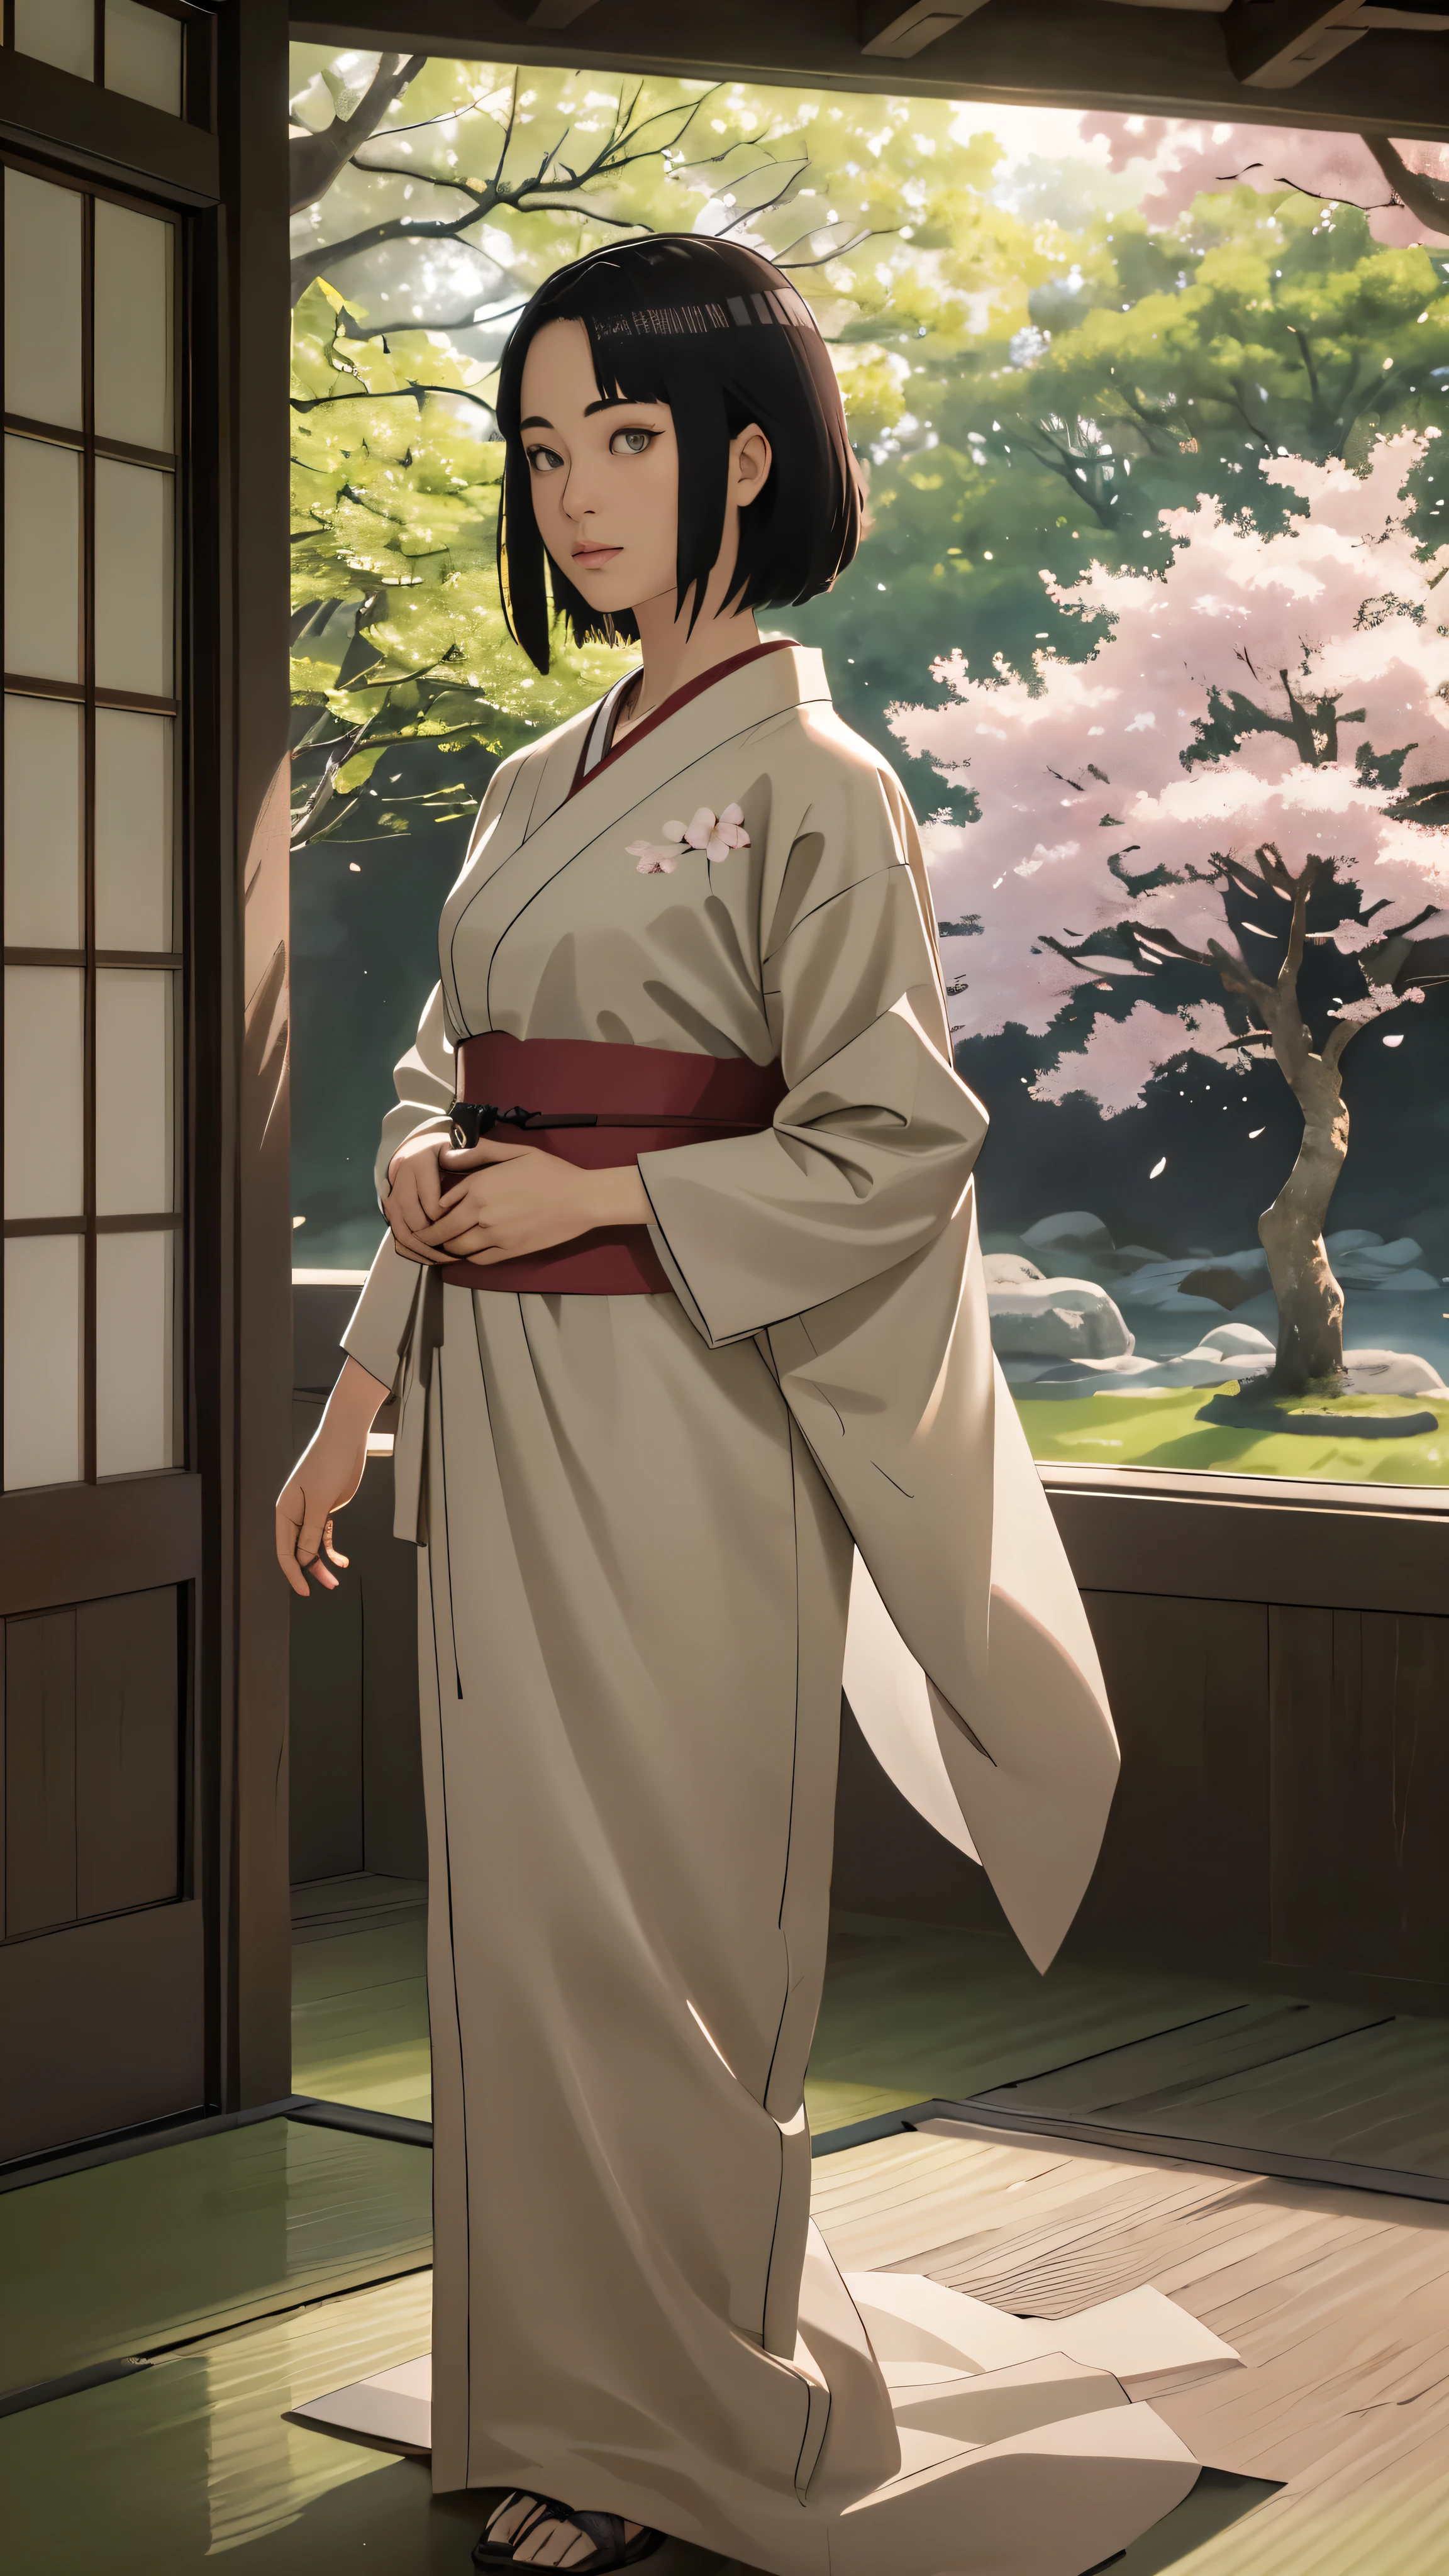 ((Best quality)), ((masterpiece)), ((realistic))

A girl with flawless beauty stands in a serene Japanese garden, bathed in the gentle sunlight filtering through the canopy of cherry blossom trees. The petals on the eye level gracefully frame her elegant silhouette, creating a stunningly scenic tableau. This meticulously crafted image is a true masterpiece, boasting high resolution and originality. Every detail is rendered with extreme care, resulting in an incredibly detailed 8K representation. The lifelike quality, or photorealism 1.4, further accentuates the stunning naturalism of the scene.

Her perfectly symmetrical figure strikes a thought